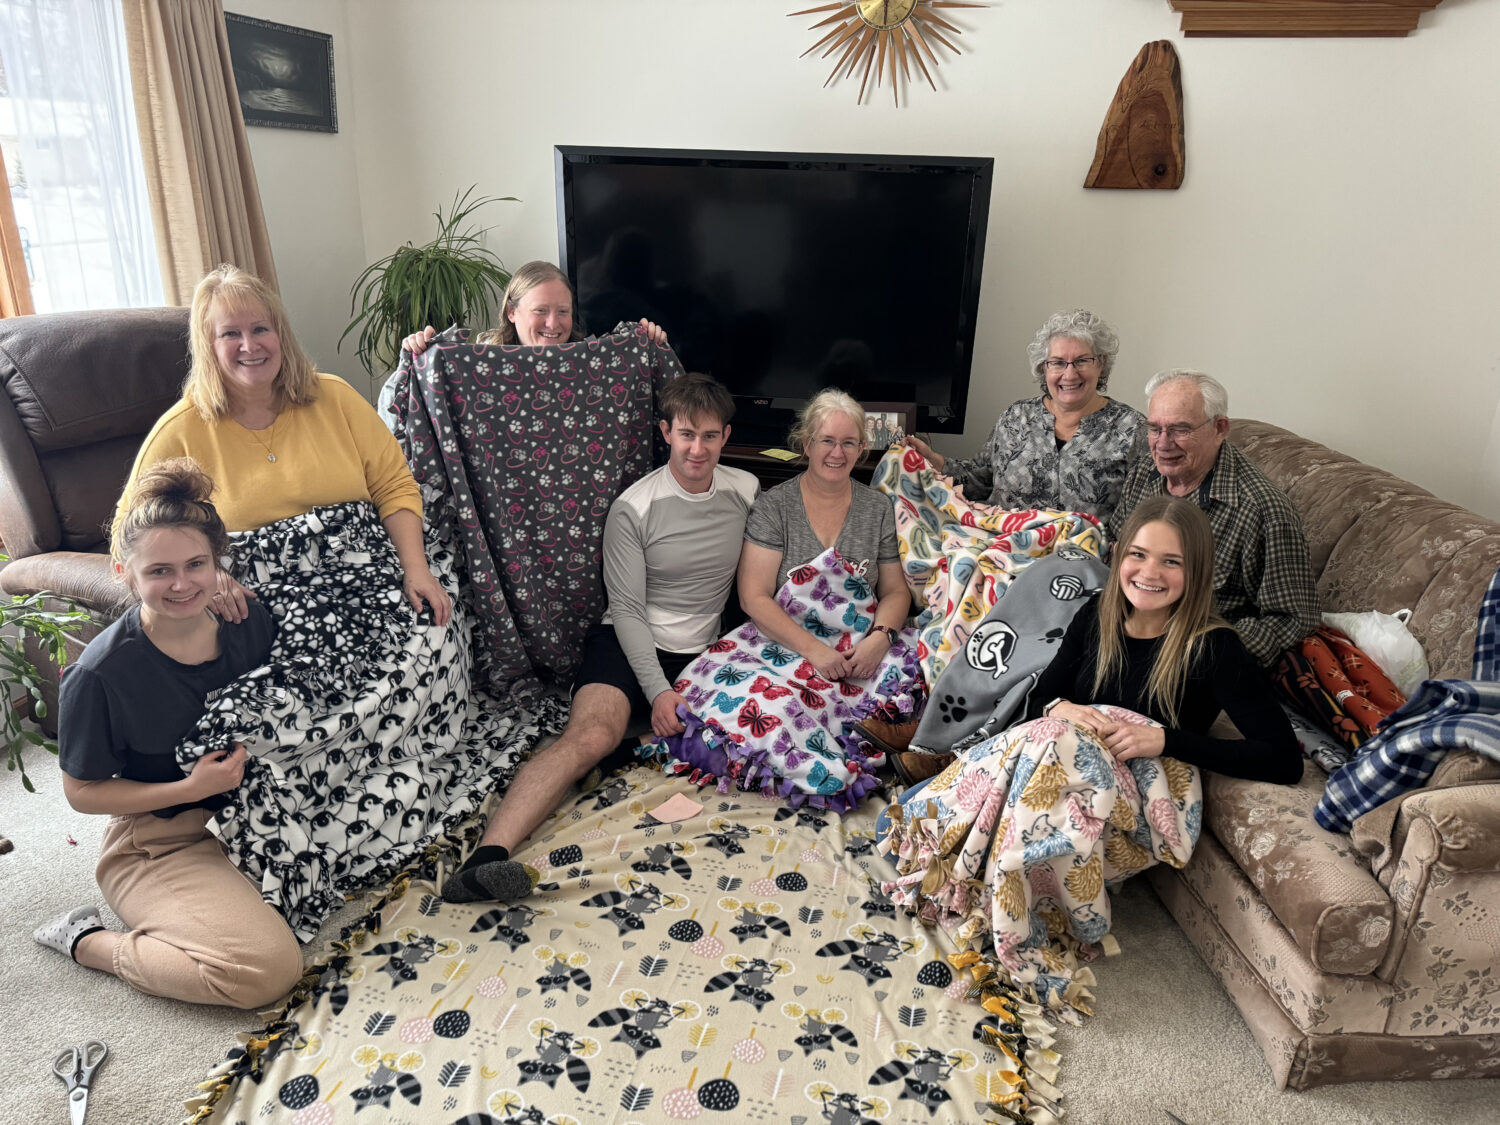 Family gathers to make and donate blankets in memory of Malinda Burrow